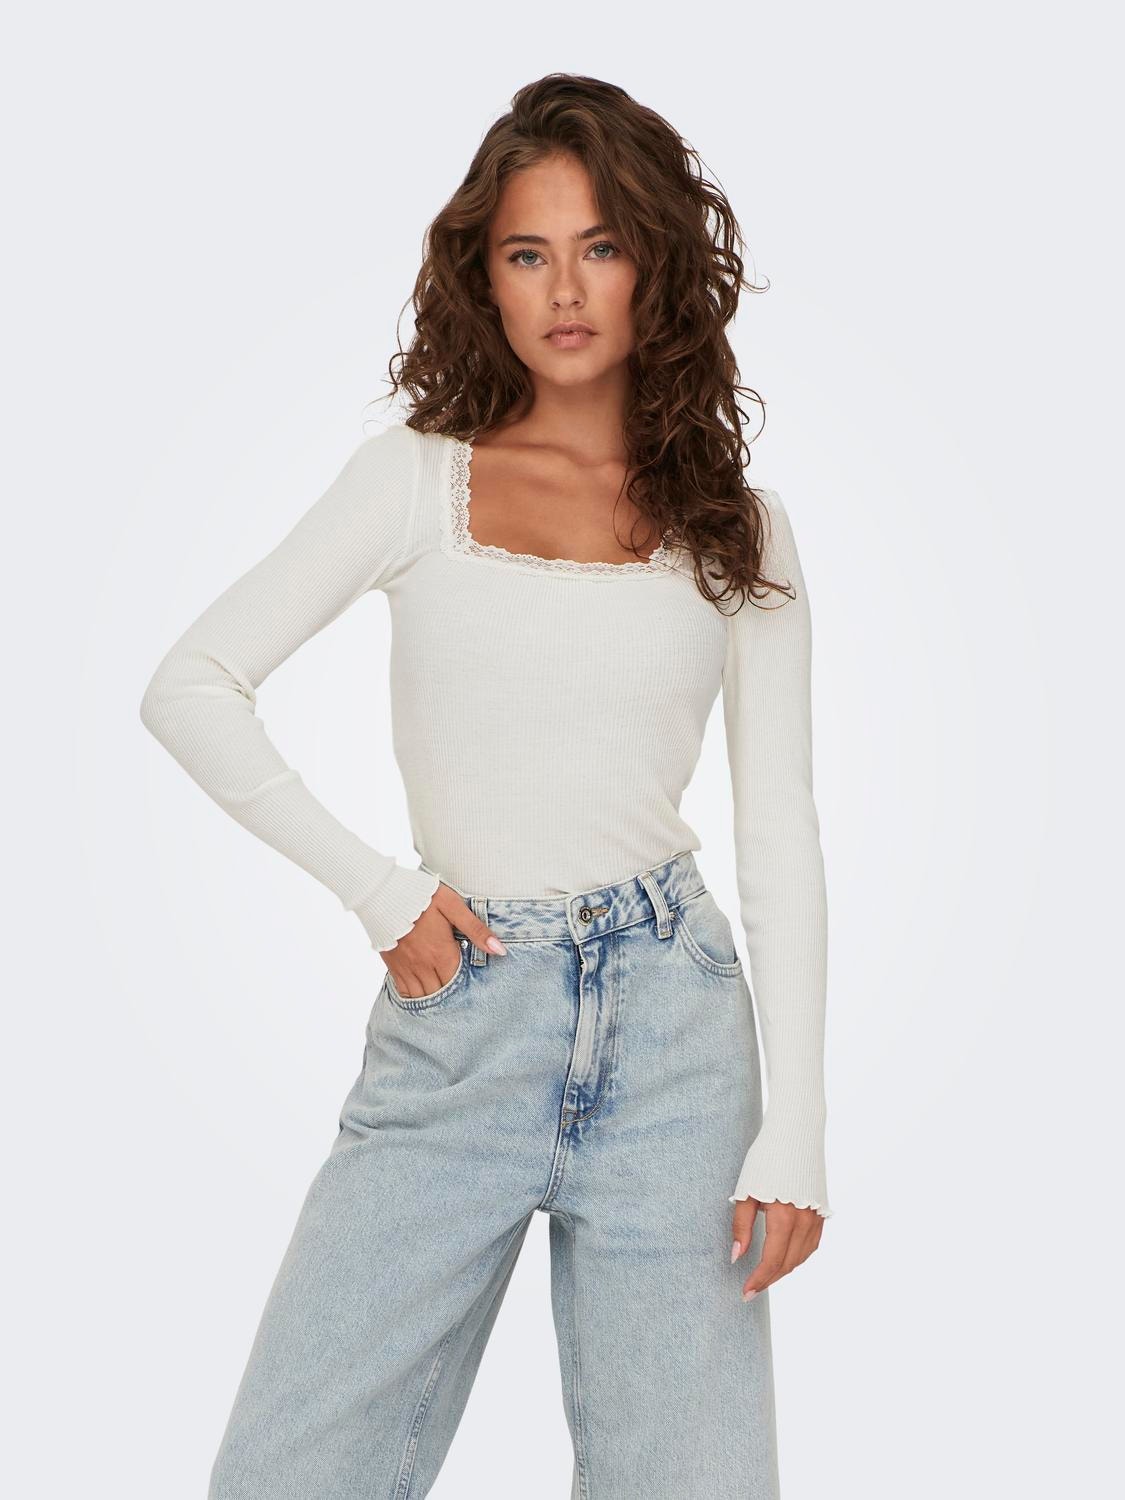 https://images.only.com/15302641/4371280/003/only-squareneckribtop-white.jpg?v=79a8c74dc9e041ff8ff3eb3ff21d0560&format=webp&width=1280&quality=90&key=25-0-3